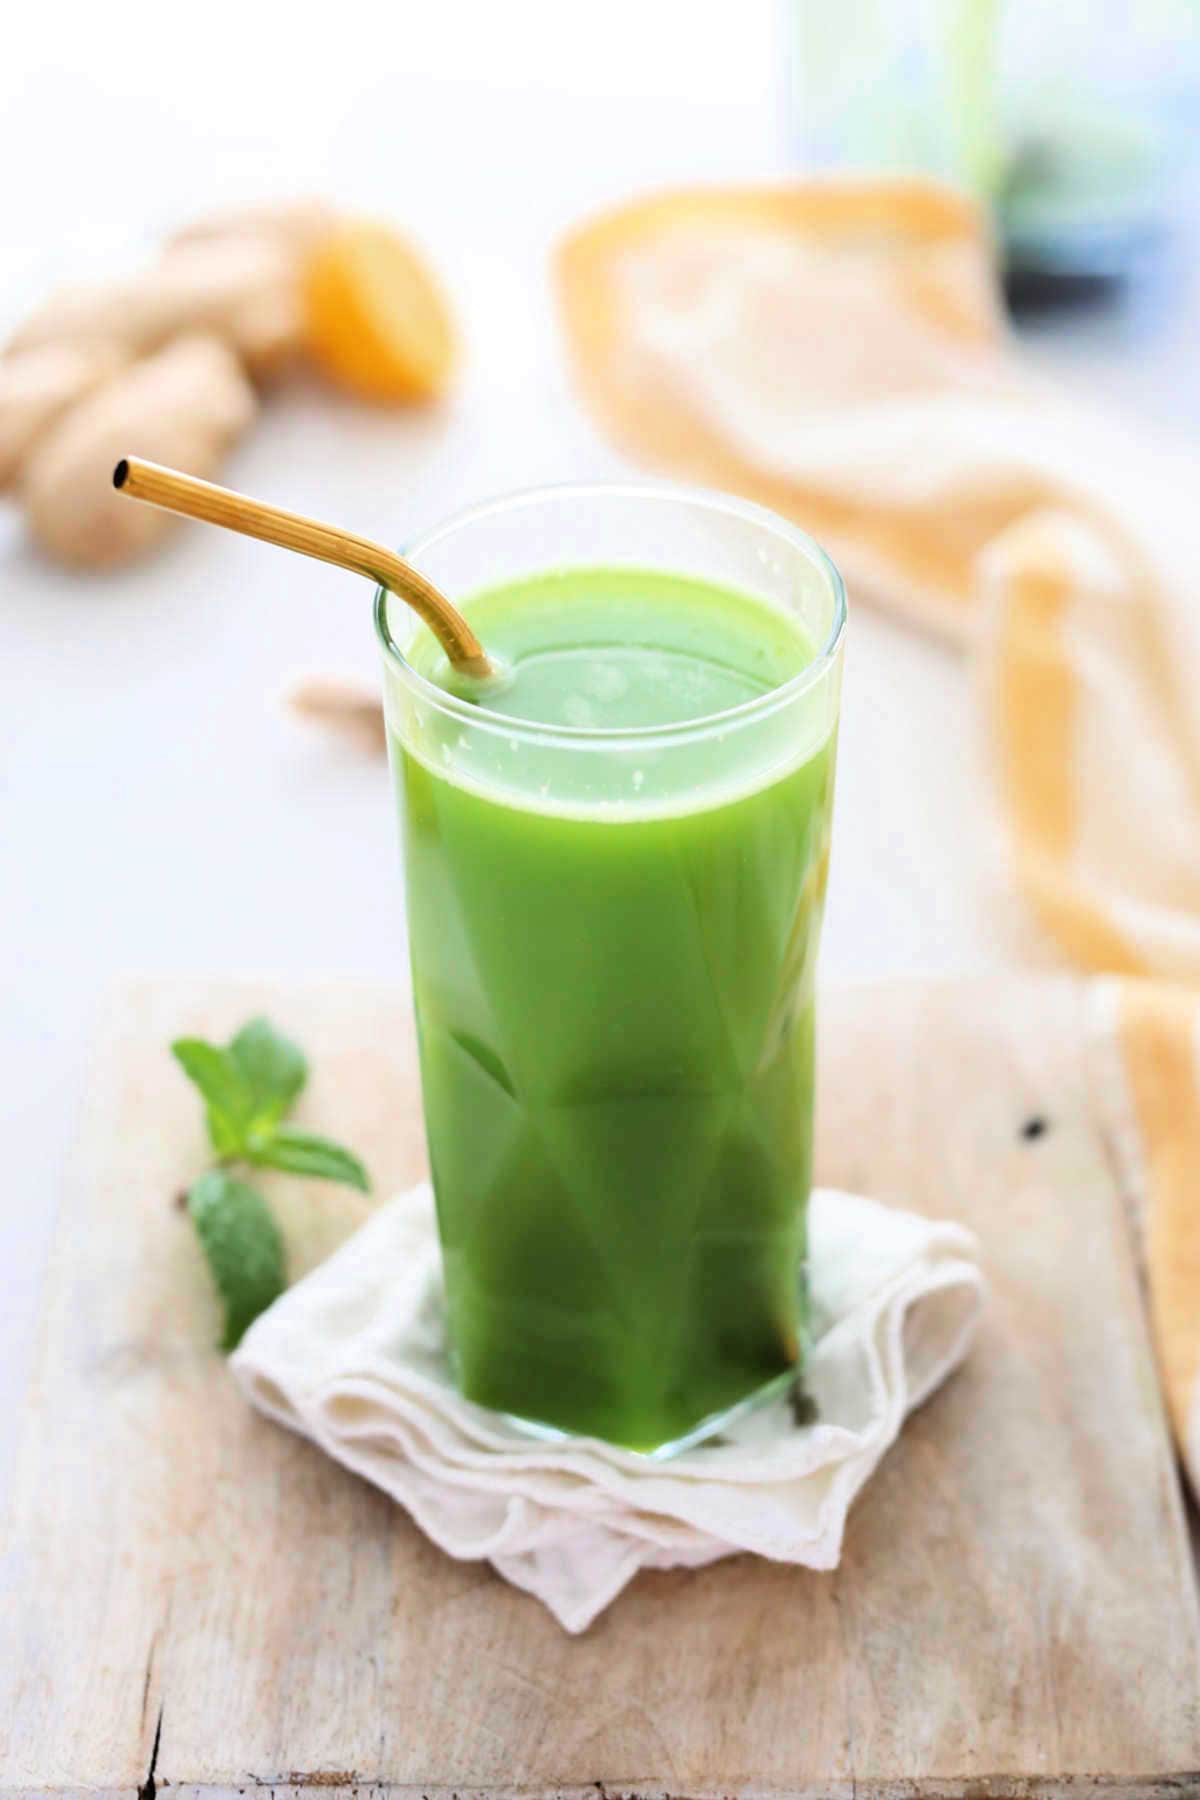 Green Smoothie Recipes For Weight Loss: The Healthy Green Smoothie Recipes  To Cleanse, Detox And Lose Weight